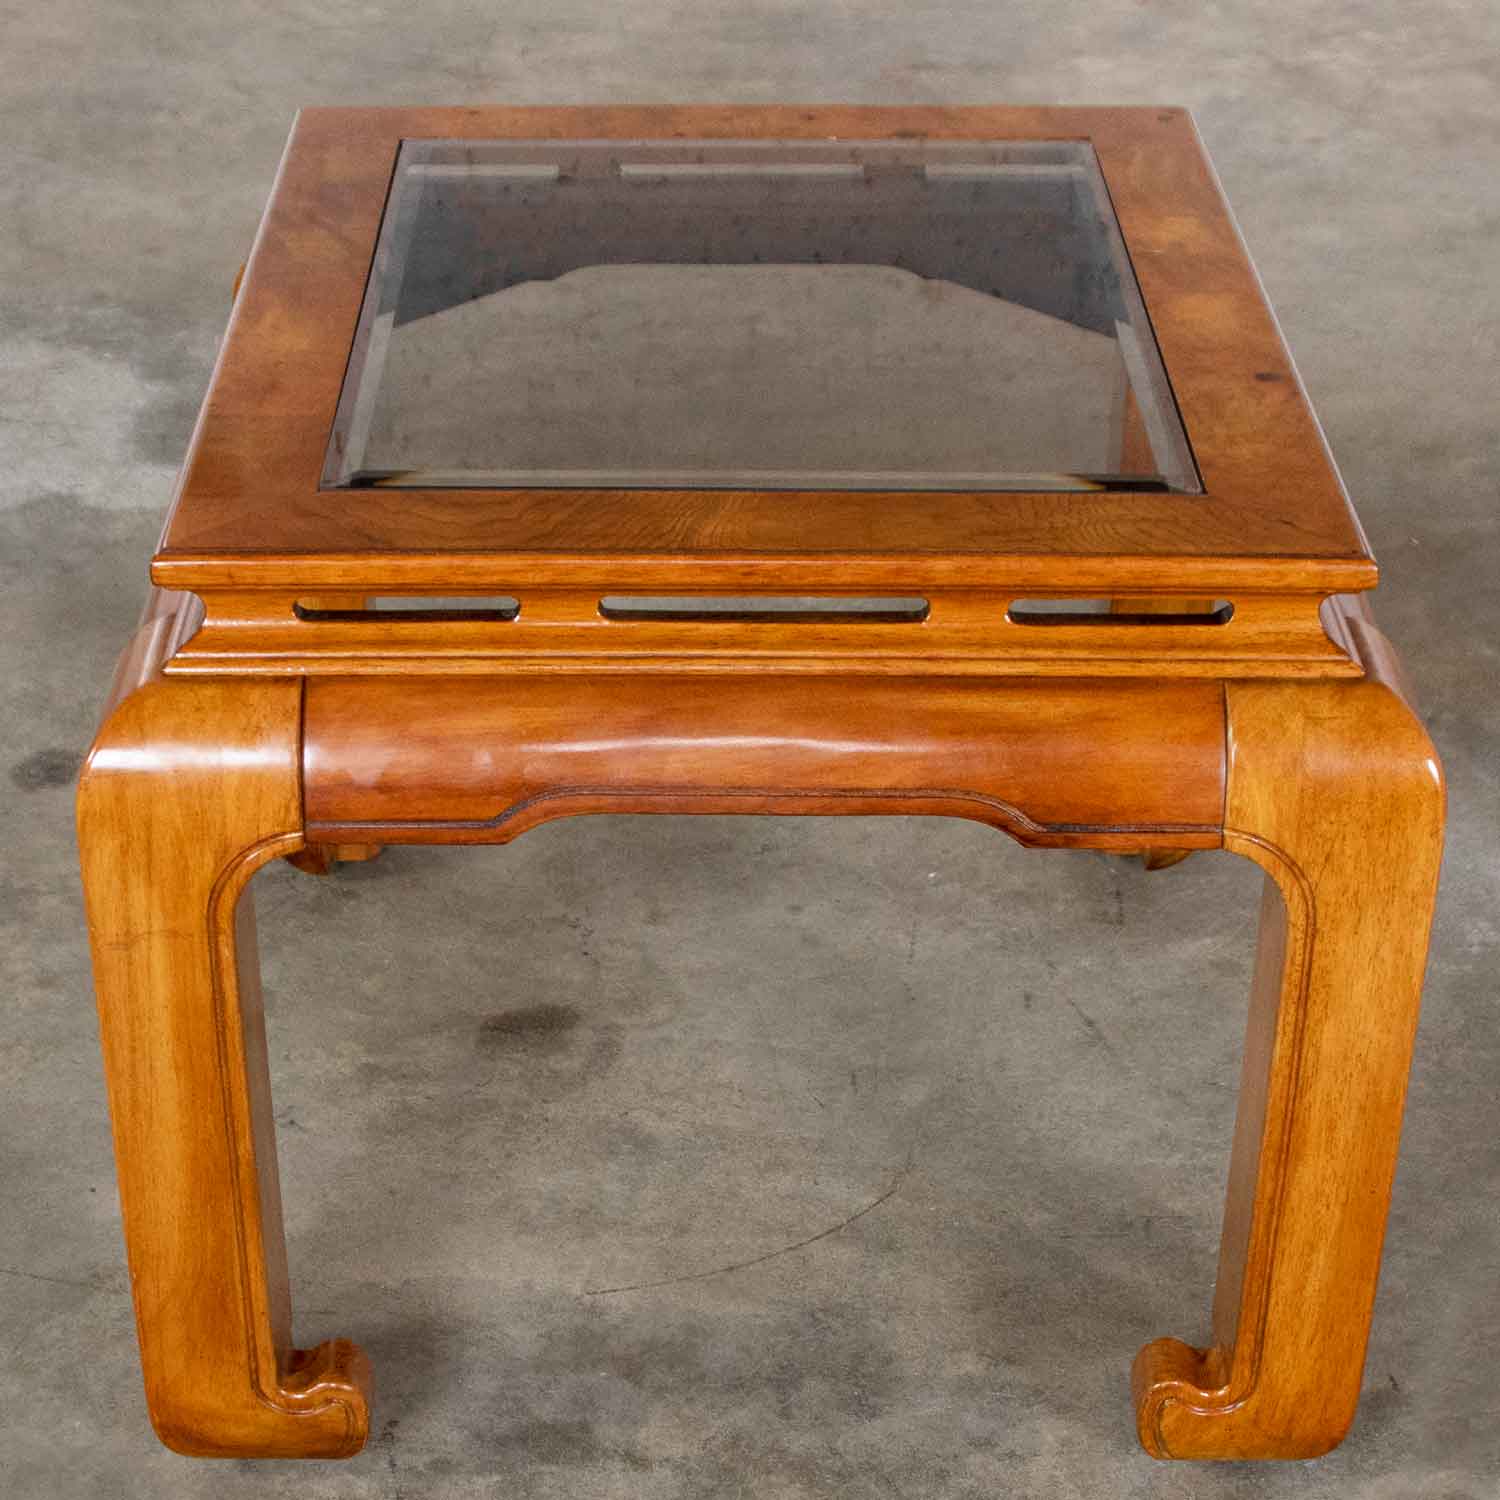 Chinoiserie Chow Leg Ming Style End Table Smoke Glass Top Insert Schnadig International Furniture